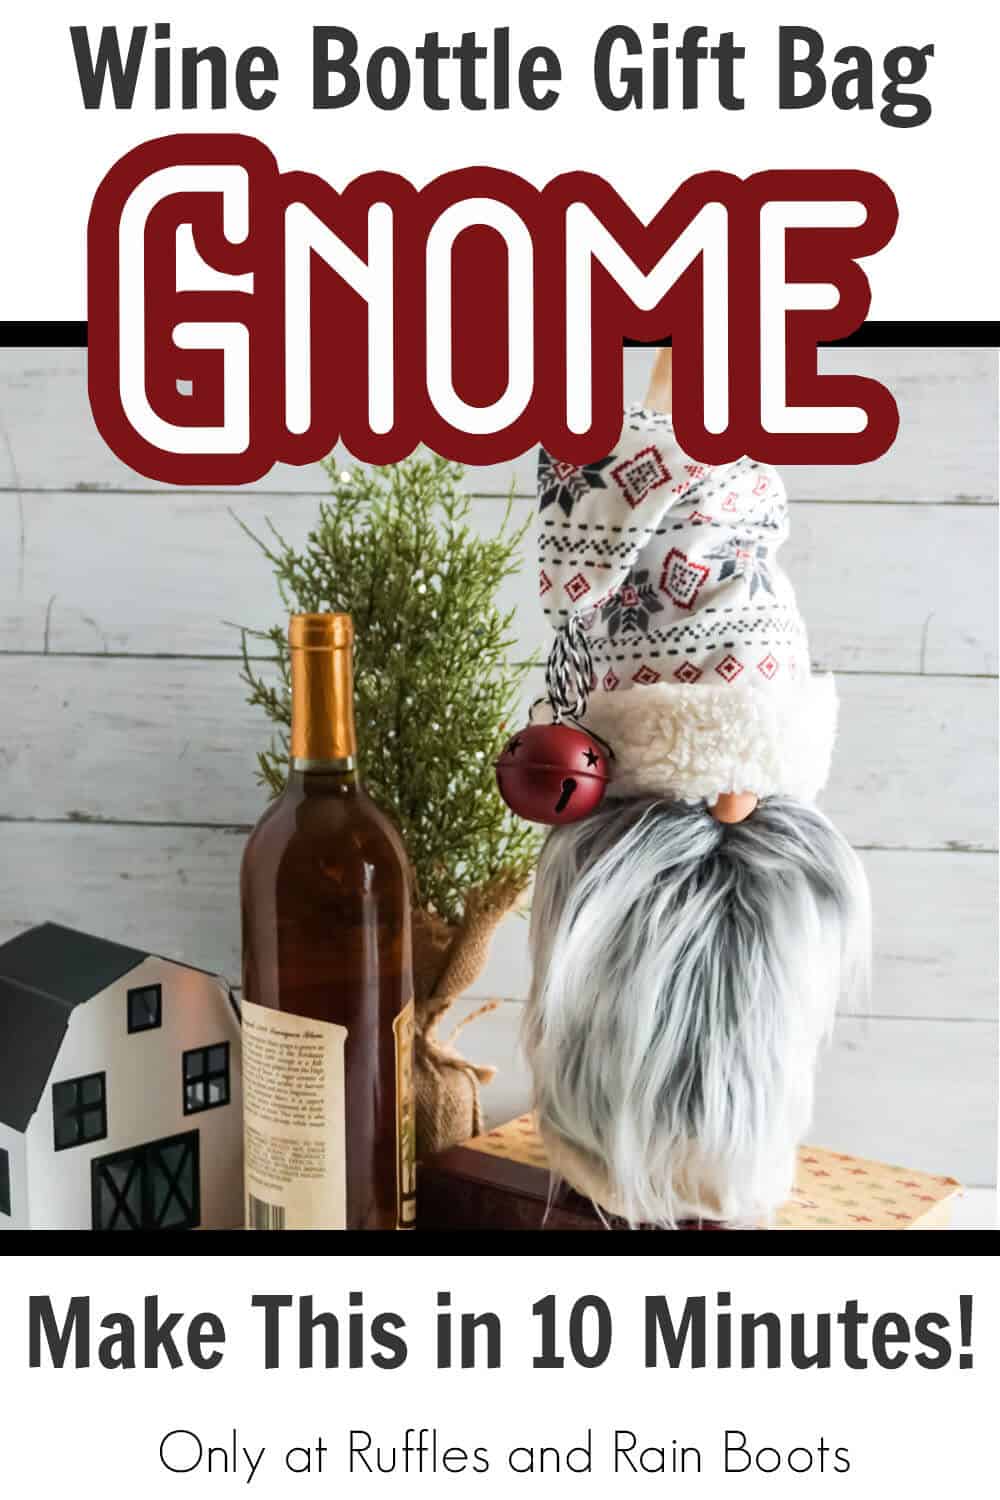 scandinvian gnome wine bottle bag gnome craft with text which reads wine bottle gift bag gnome make this in 10 minutes!